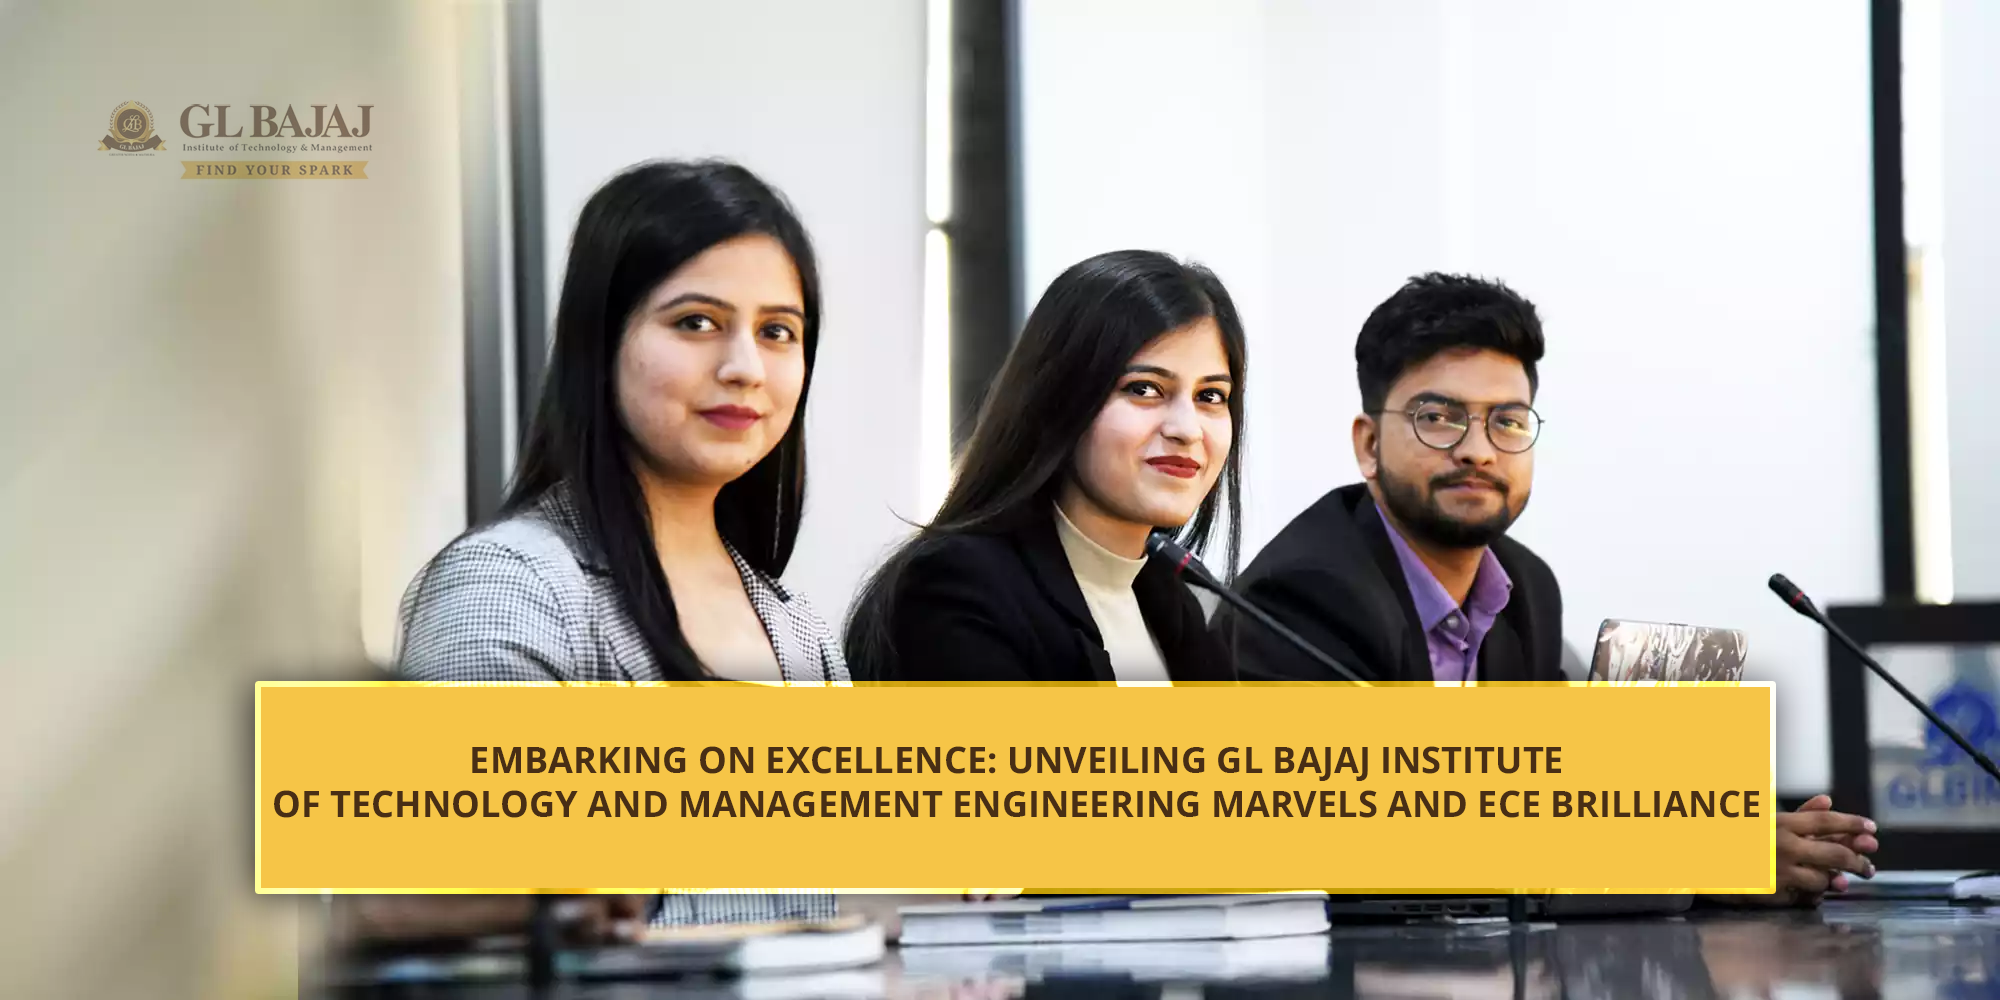 Embarking on Excellence: Unveiling GL Bajaj Institute of Technology and Management Engineering Marvels and ECE Brilliance